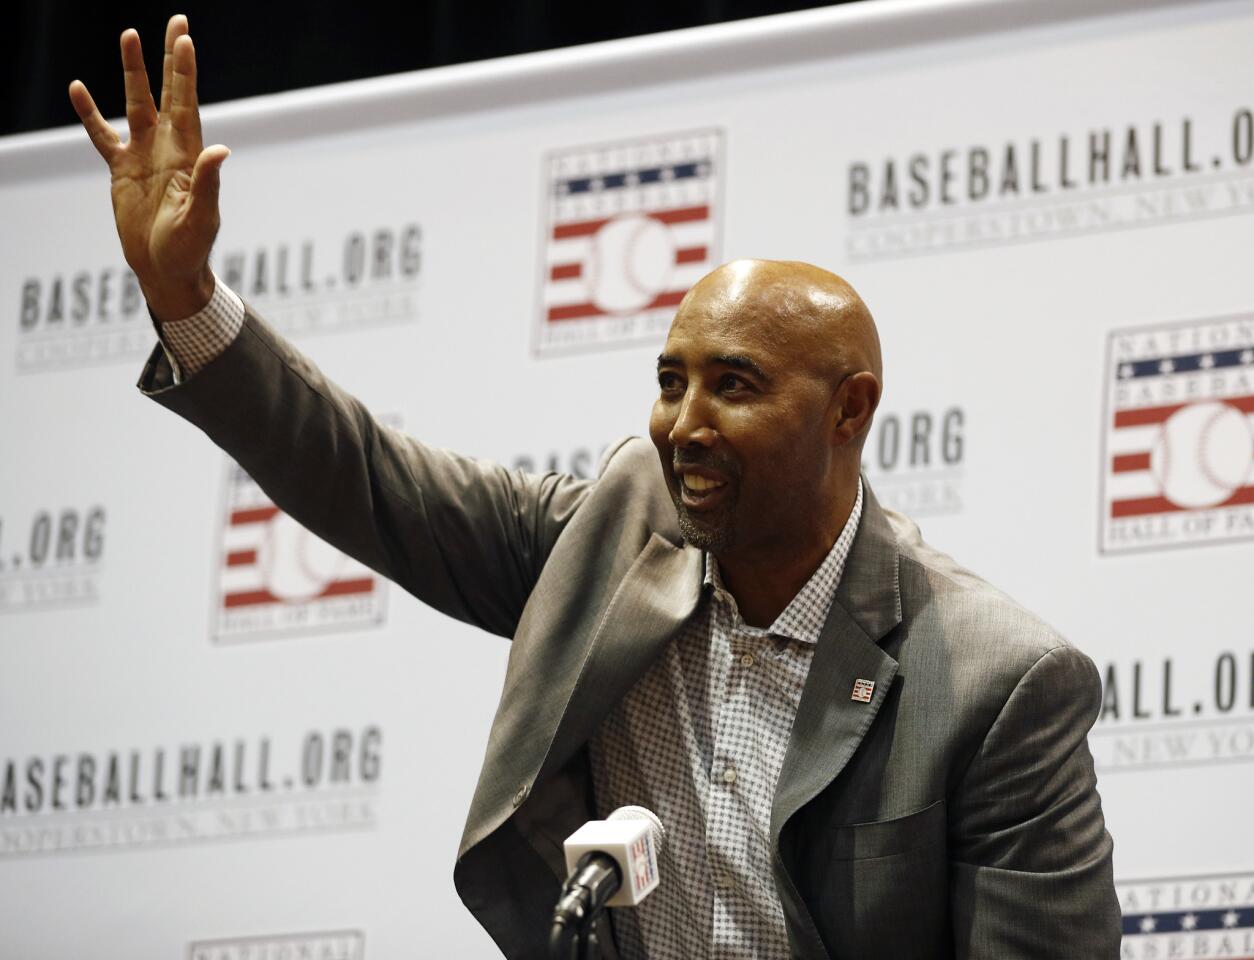 Harold Baines waves during a news conference for the Hall of Fame during the winter meetings in Las Vegas on Dec. 10, 2018.